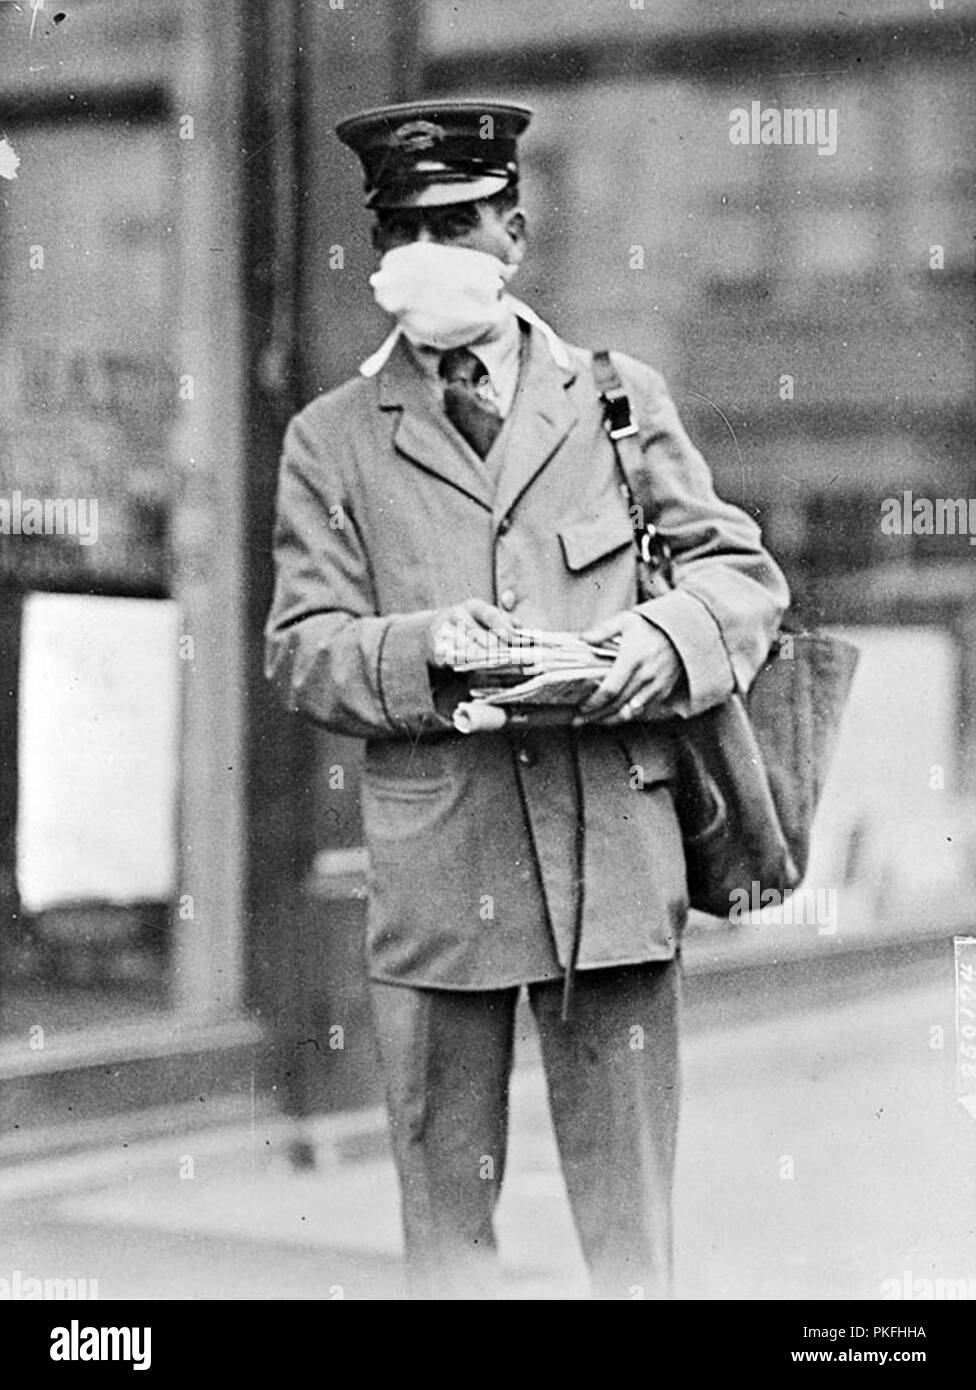 A New York City mailman goes about his business while wearing a gauze mask designed to stop infection during the fall of 1918. U.S. Army units mobilizing for World War I were struck hard by the virus which often hit military bases first and then spread to civilians. Camp Upton on Long Island was closed to visitors in the fall of 1918 to prevent the spread of the flu. Stock Photo